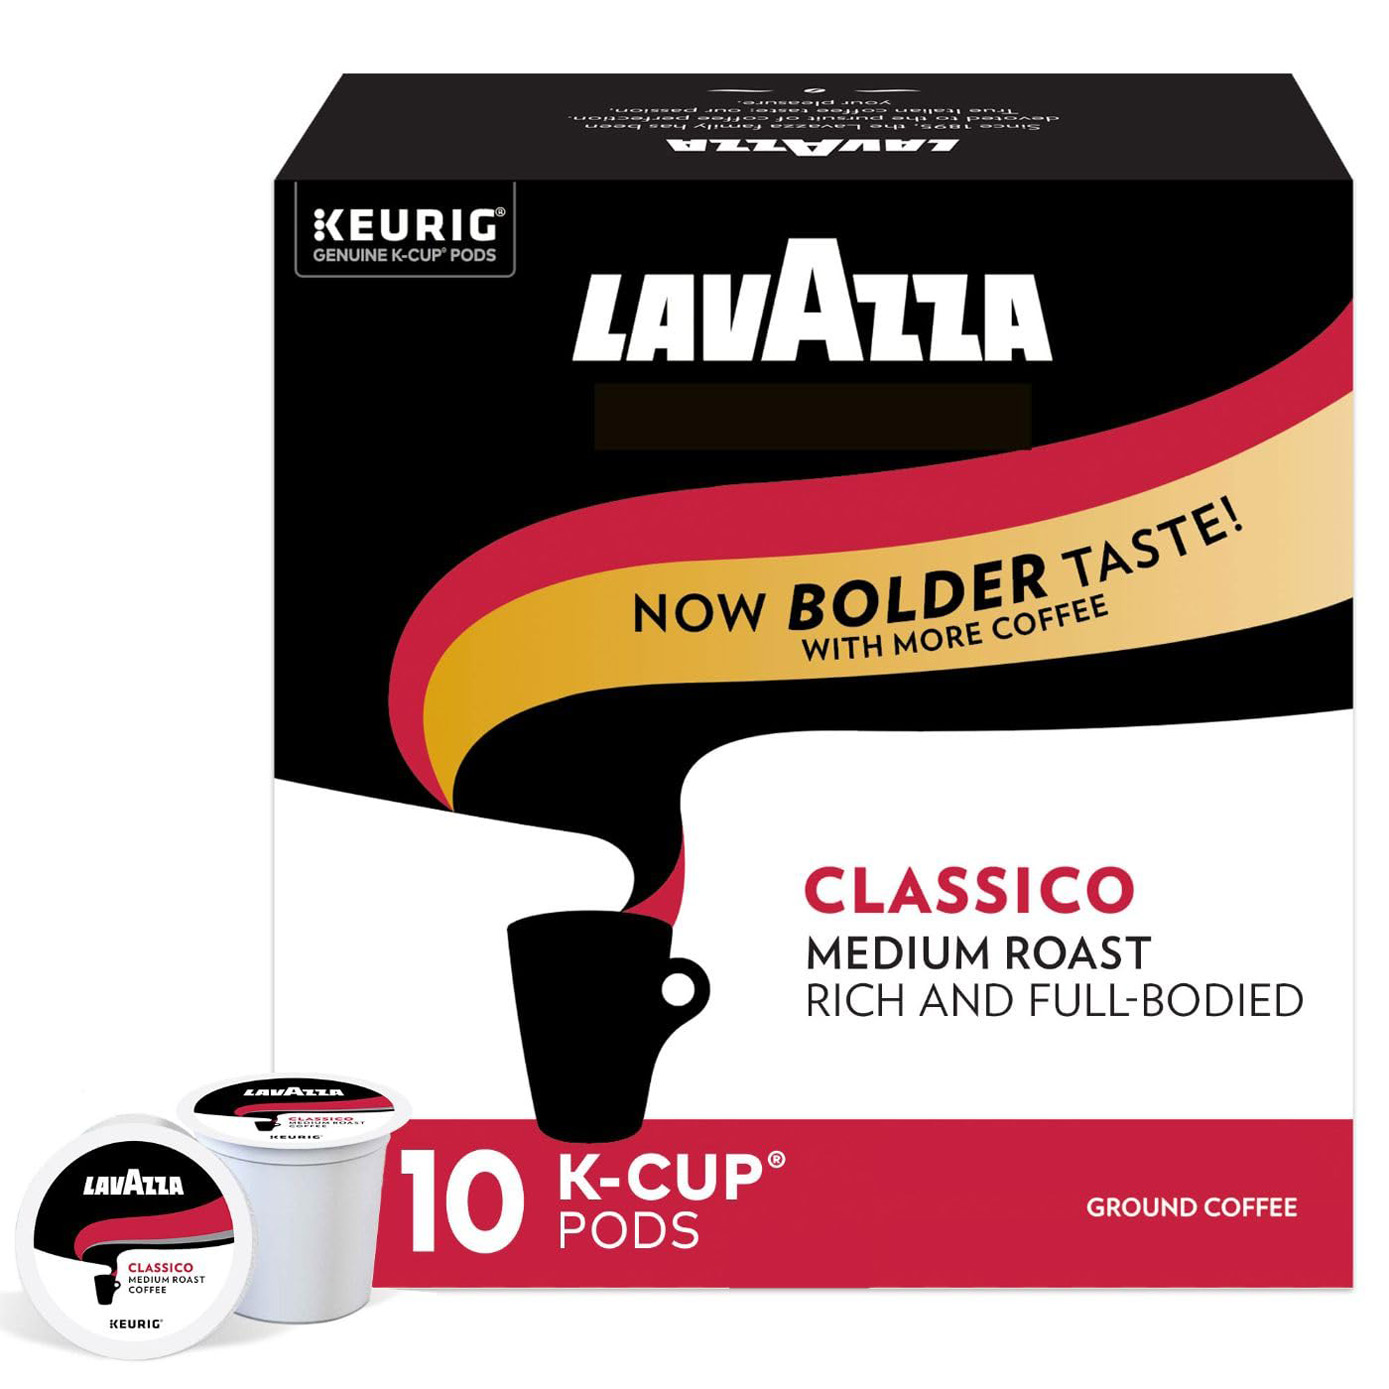 Lavazza Classico Single-Serve Coffee K-Cups for Keurig Brewer